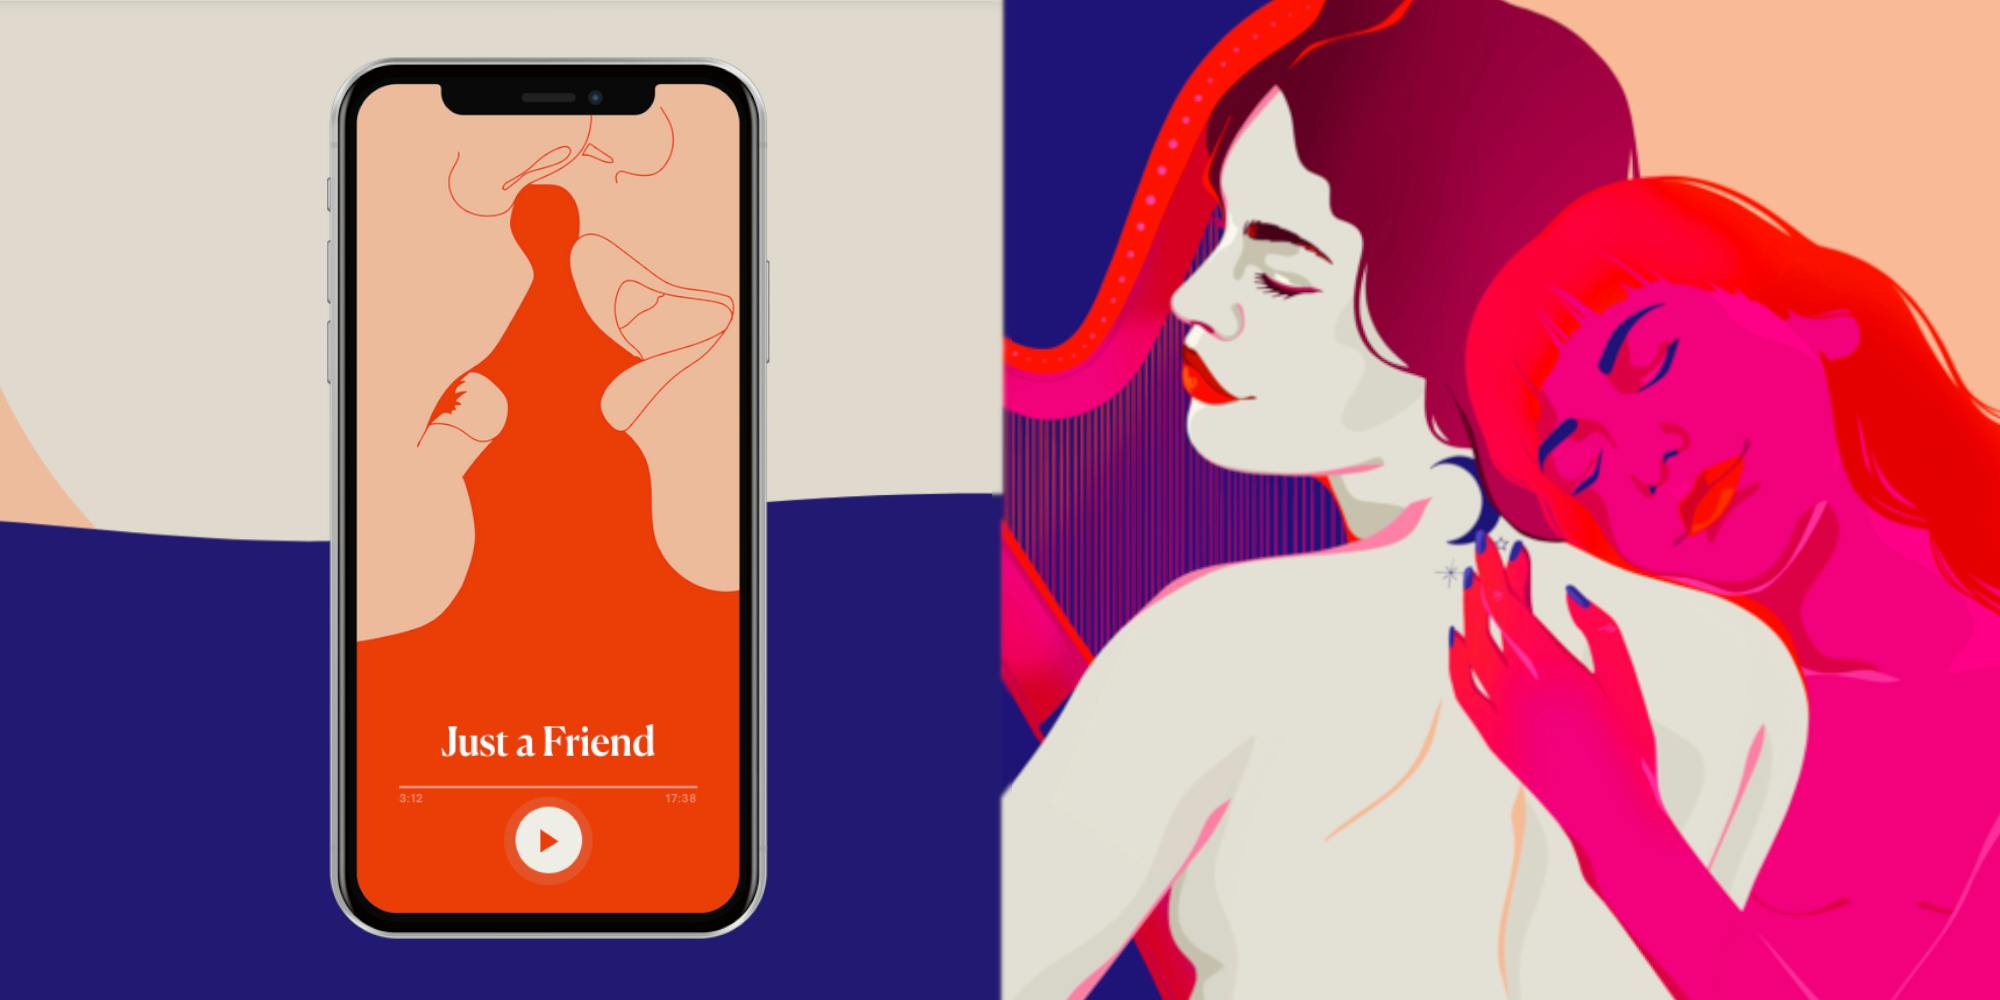 Illustration of phone with Dipsea app next to an illustration of two women embracing.